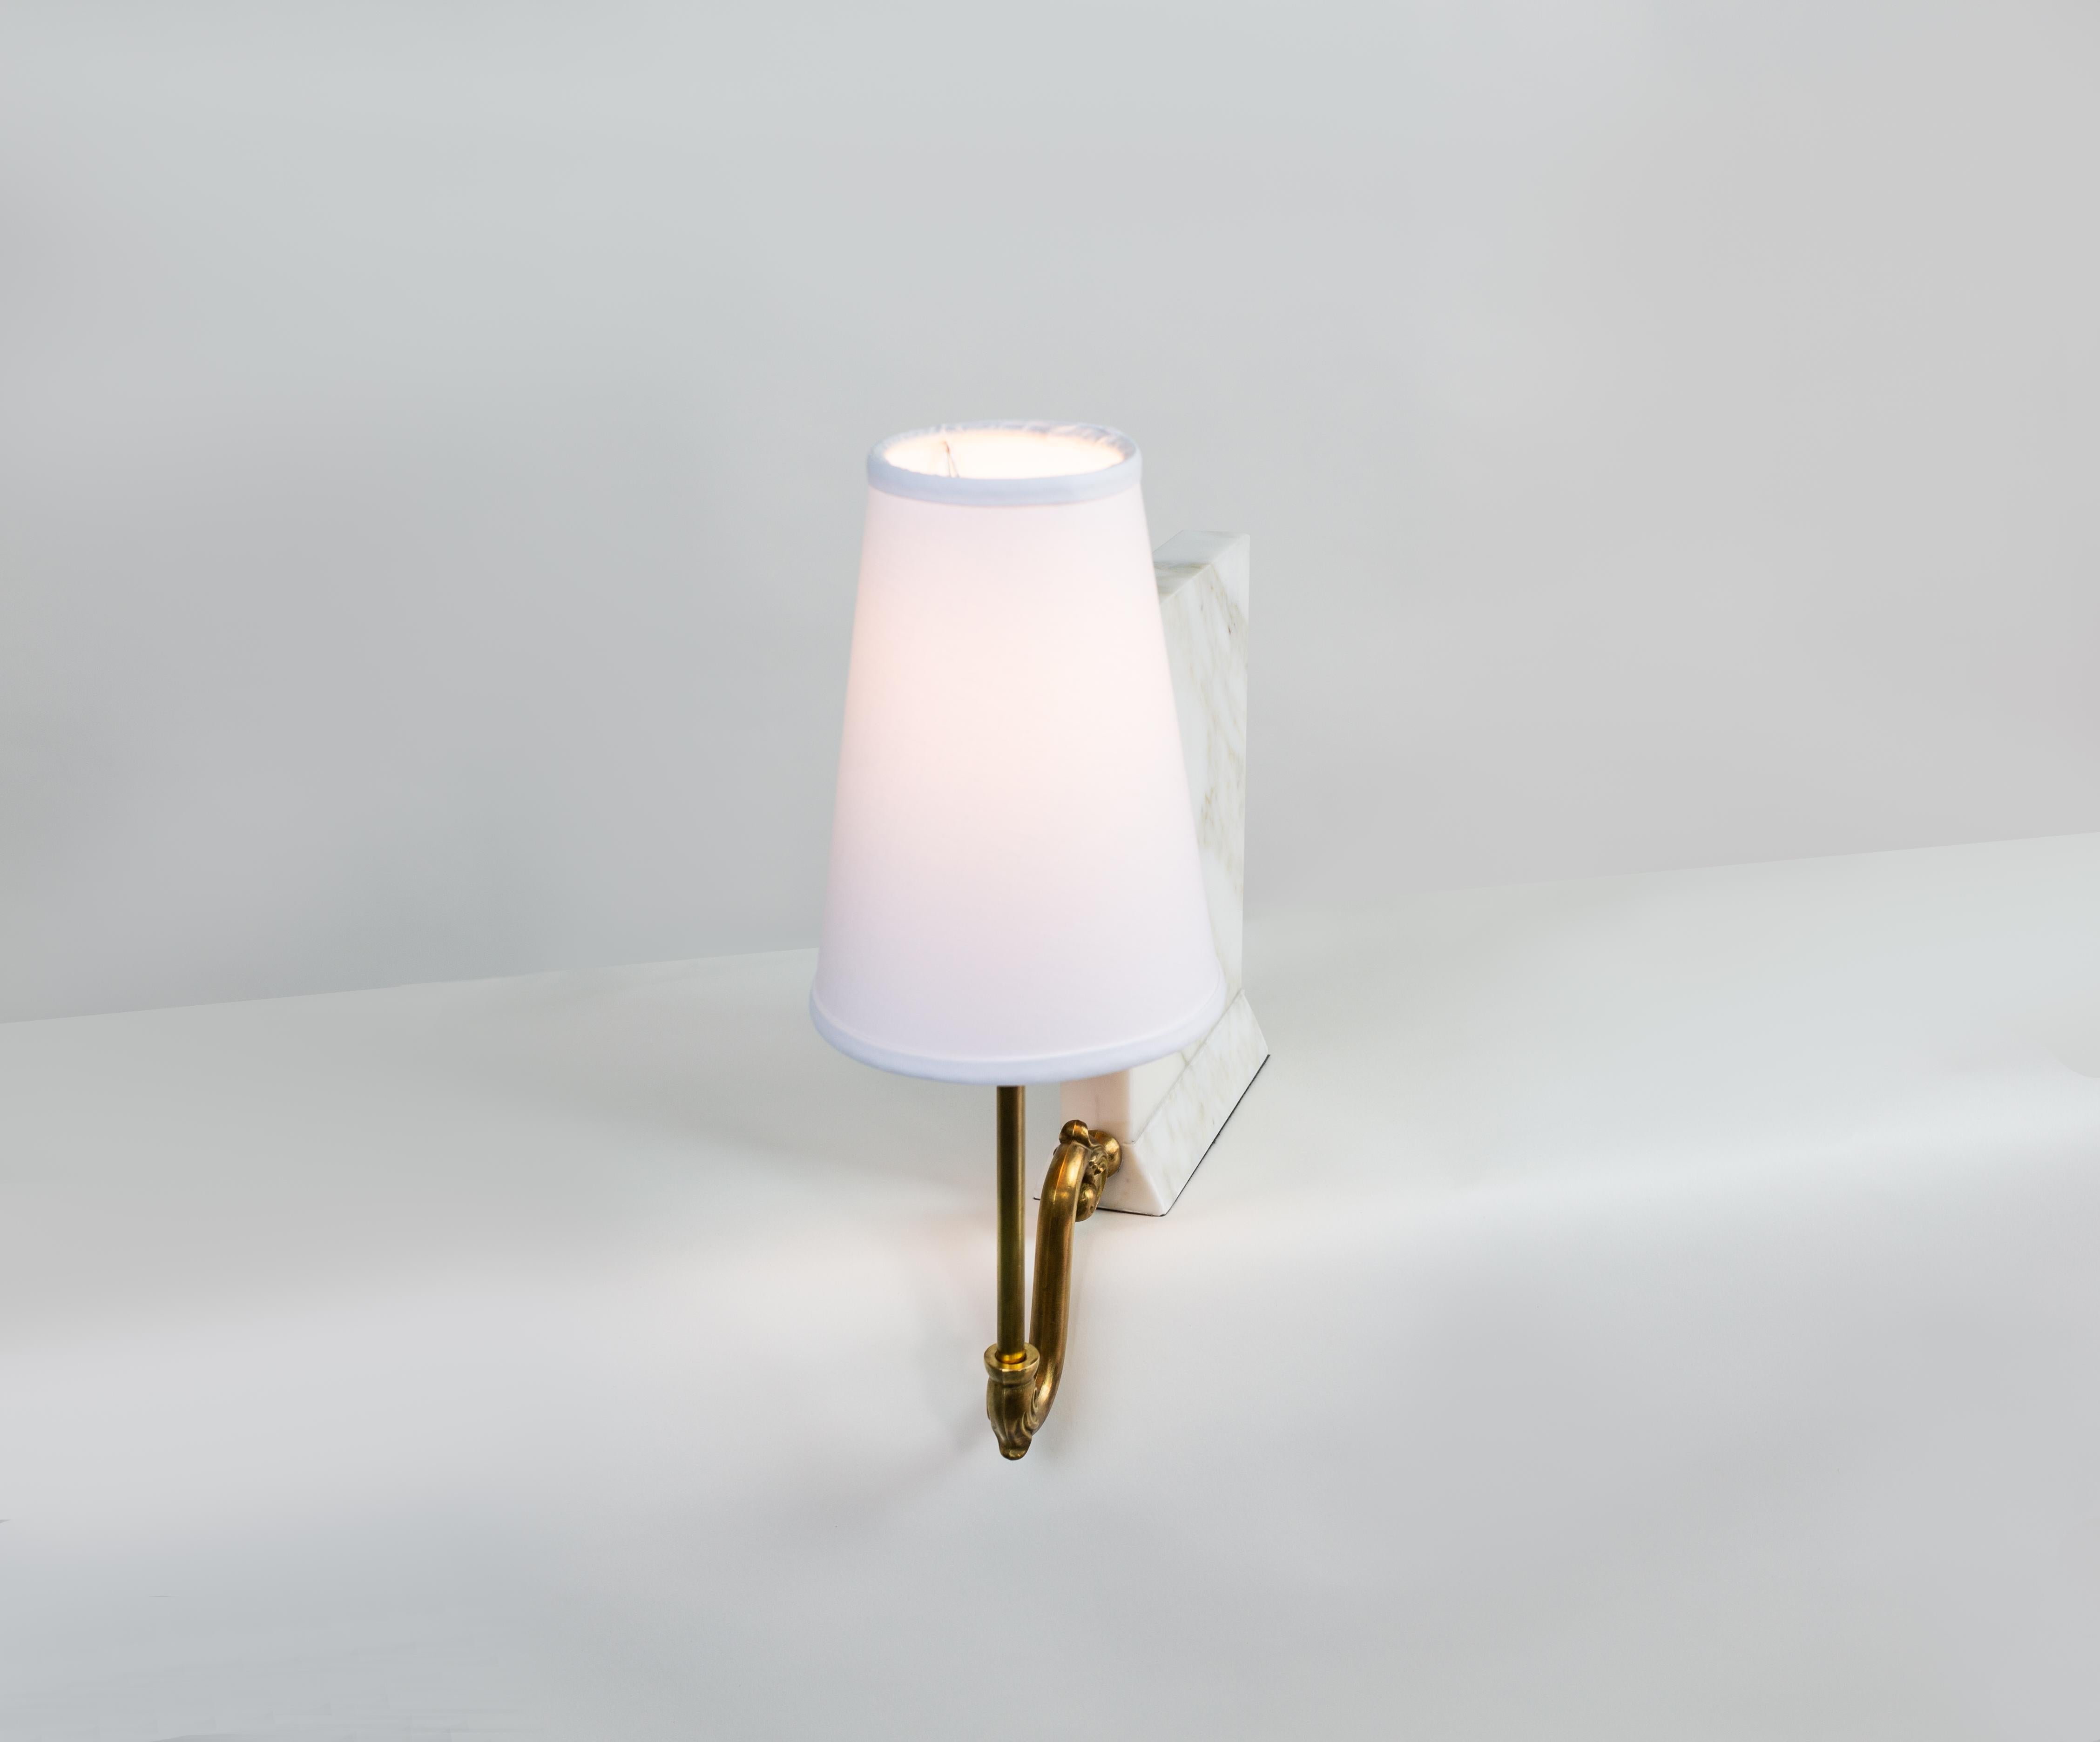 The listing is for an in stock sconce in raw brass and white linen lampshade. We keep a pair in stock at all times. If additional pieces are needed please allow 4-6 weeks lead time.
If a different color lampshade is required, please send us a